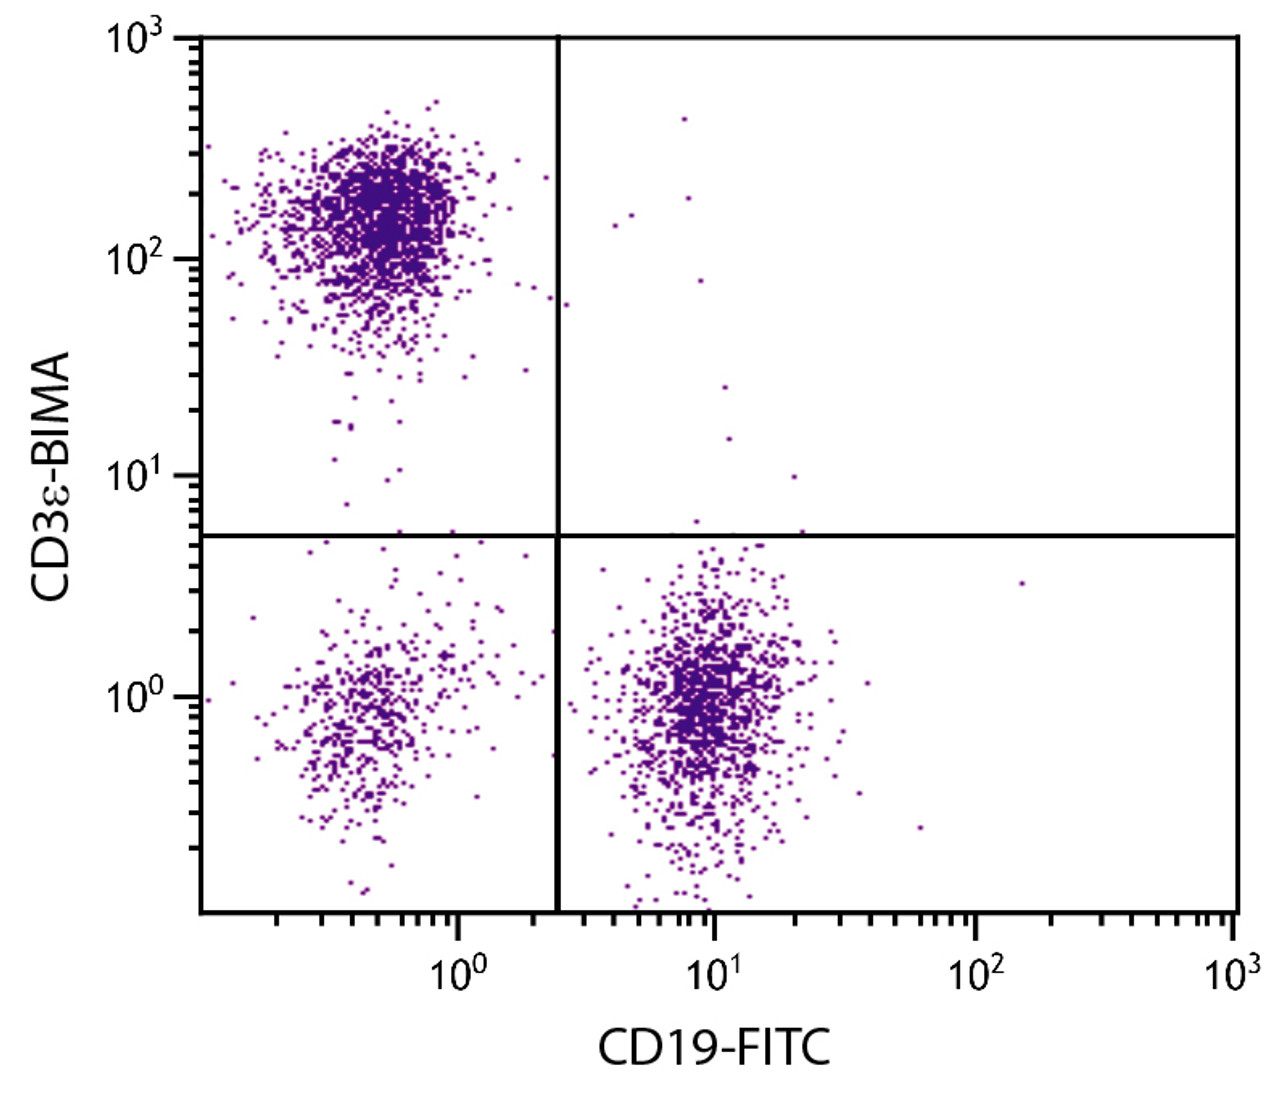 BALB/c mouse splenocytes were stained with Hamster Anti-Mouse CD3?-BIMA (Cat. No. 98-565) and Rat Anti-Mouse CD19-FITC followed by Streptavidin-PE .